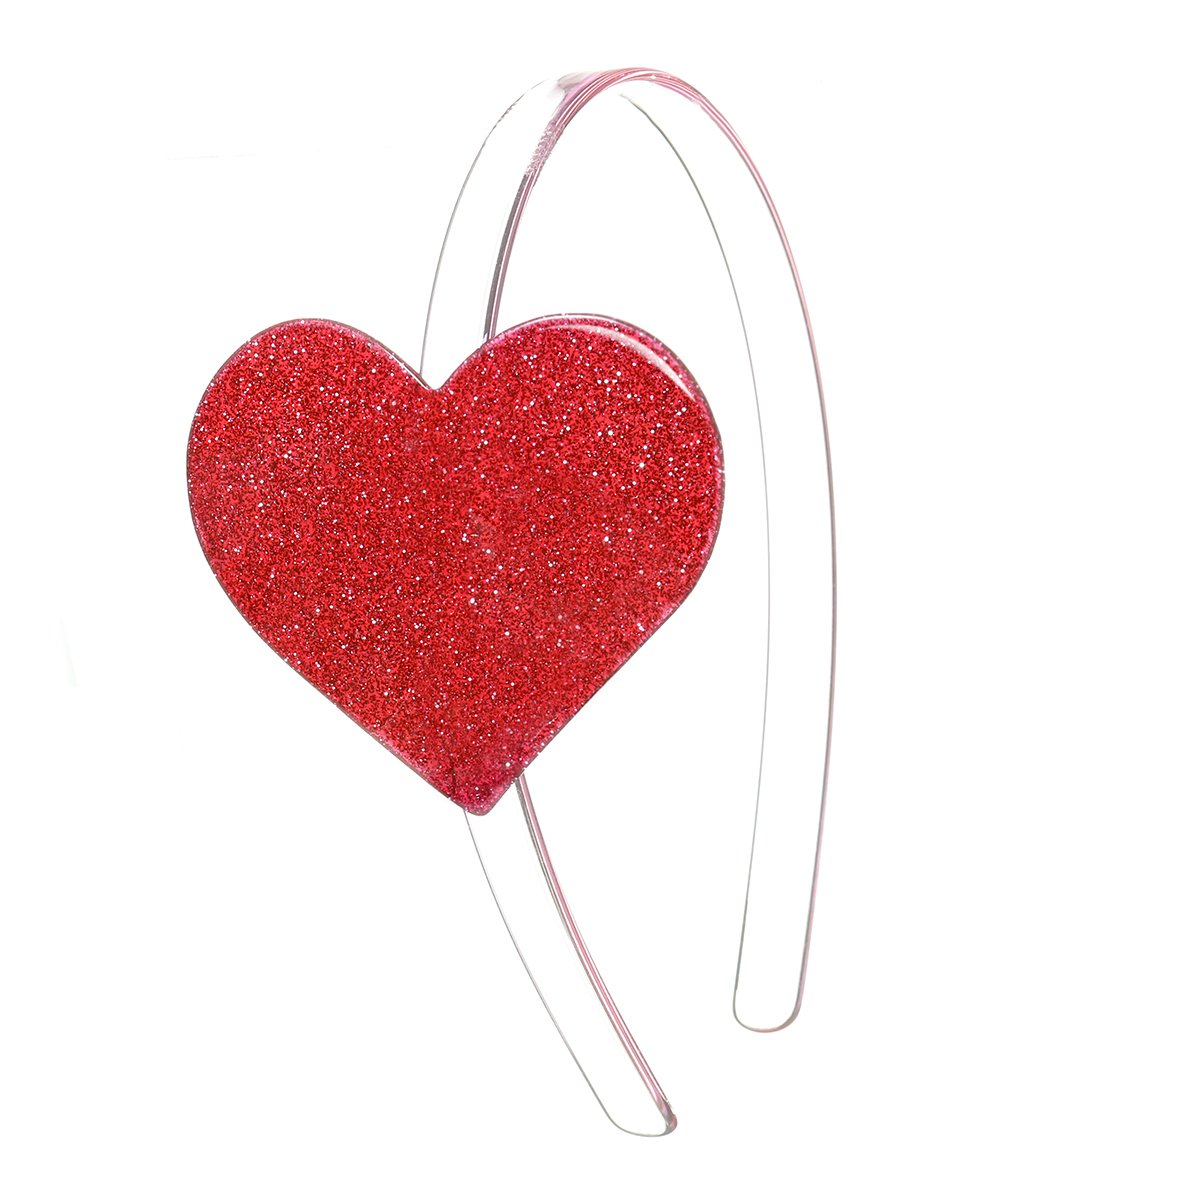 Girls clear headband with red glitter heart